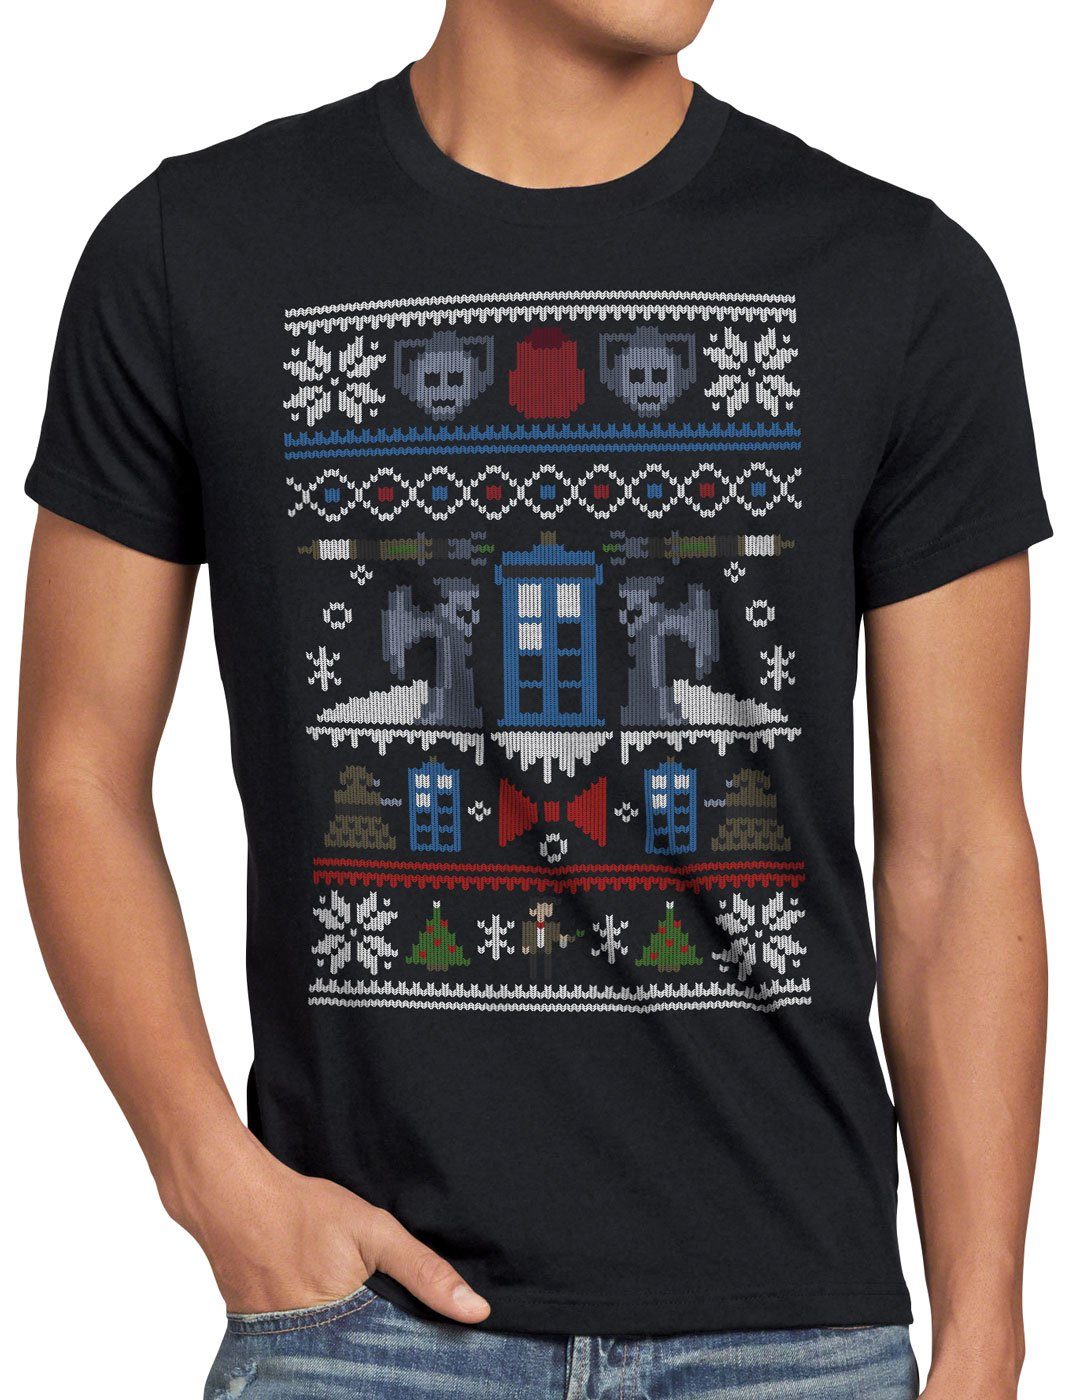 zeitreise style3 Sweater weihnachtsbaum and Print-Shirt Herren Ugly Time notrufzelle x-mas Space pulli timelord T-Shirt